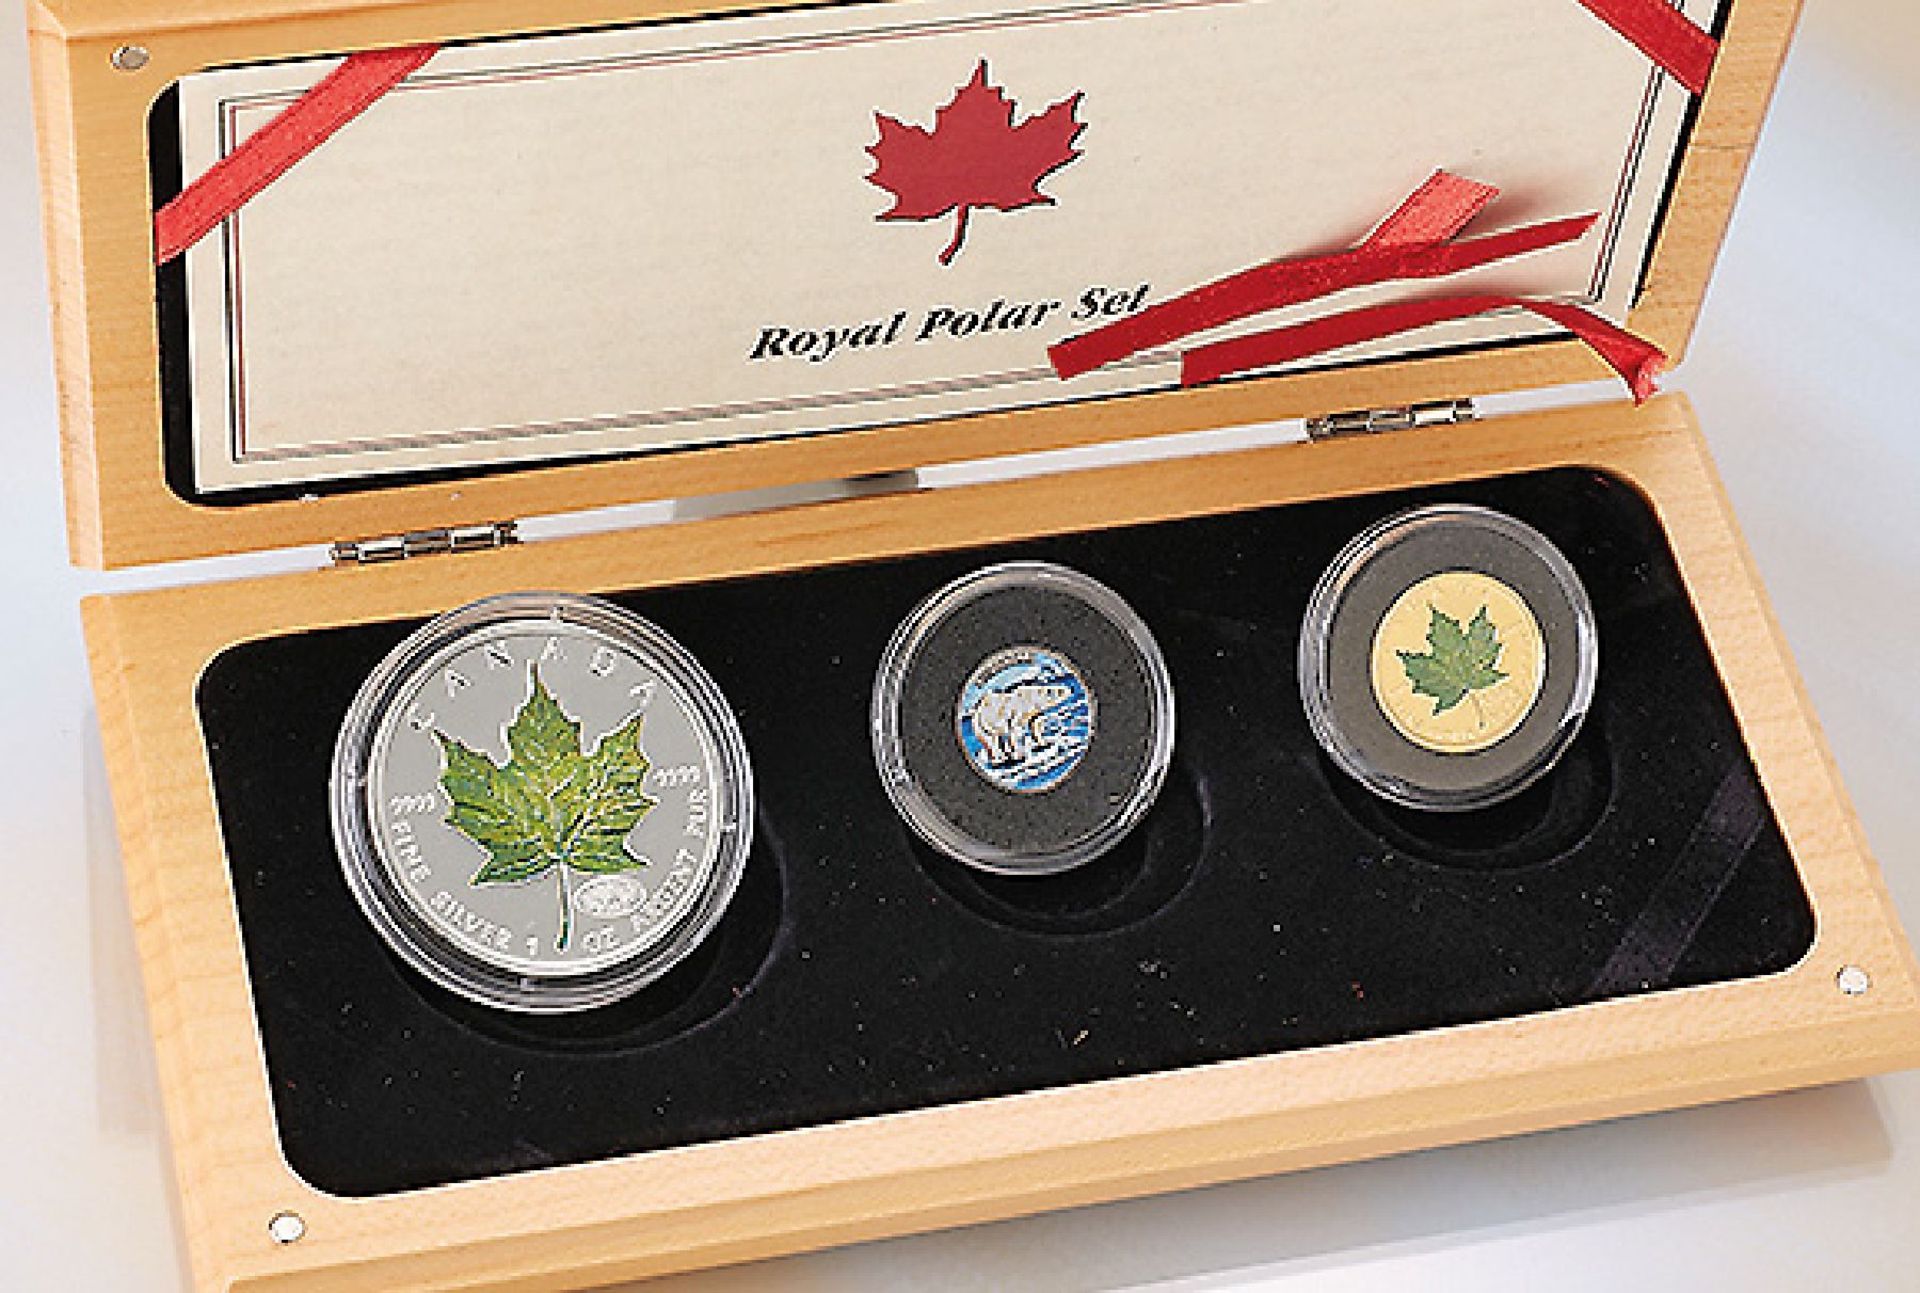 Royal Polar Set, Canada, 1999-2000 , comprised of: 3 coins with 5 and 10 canadian Dollars, so-called